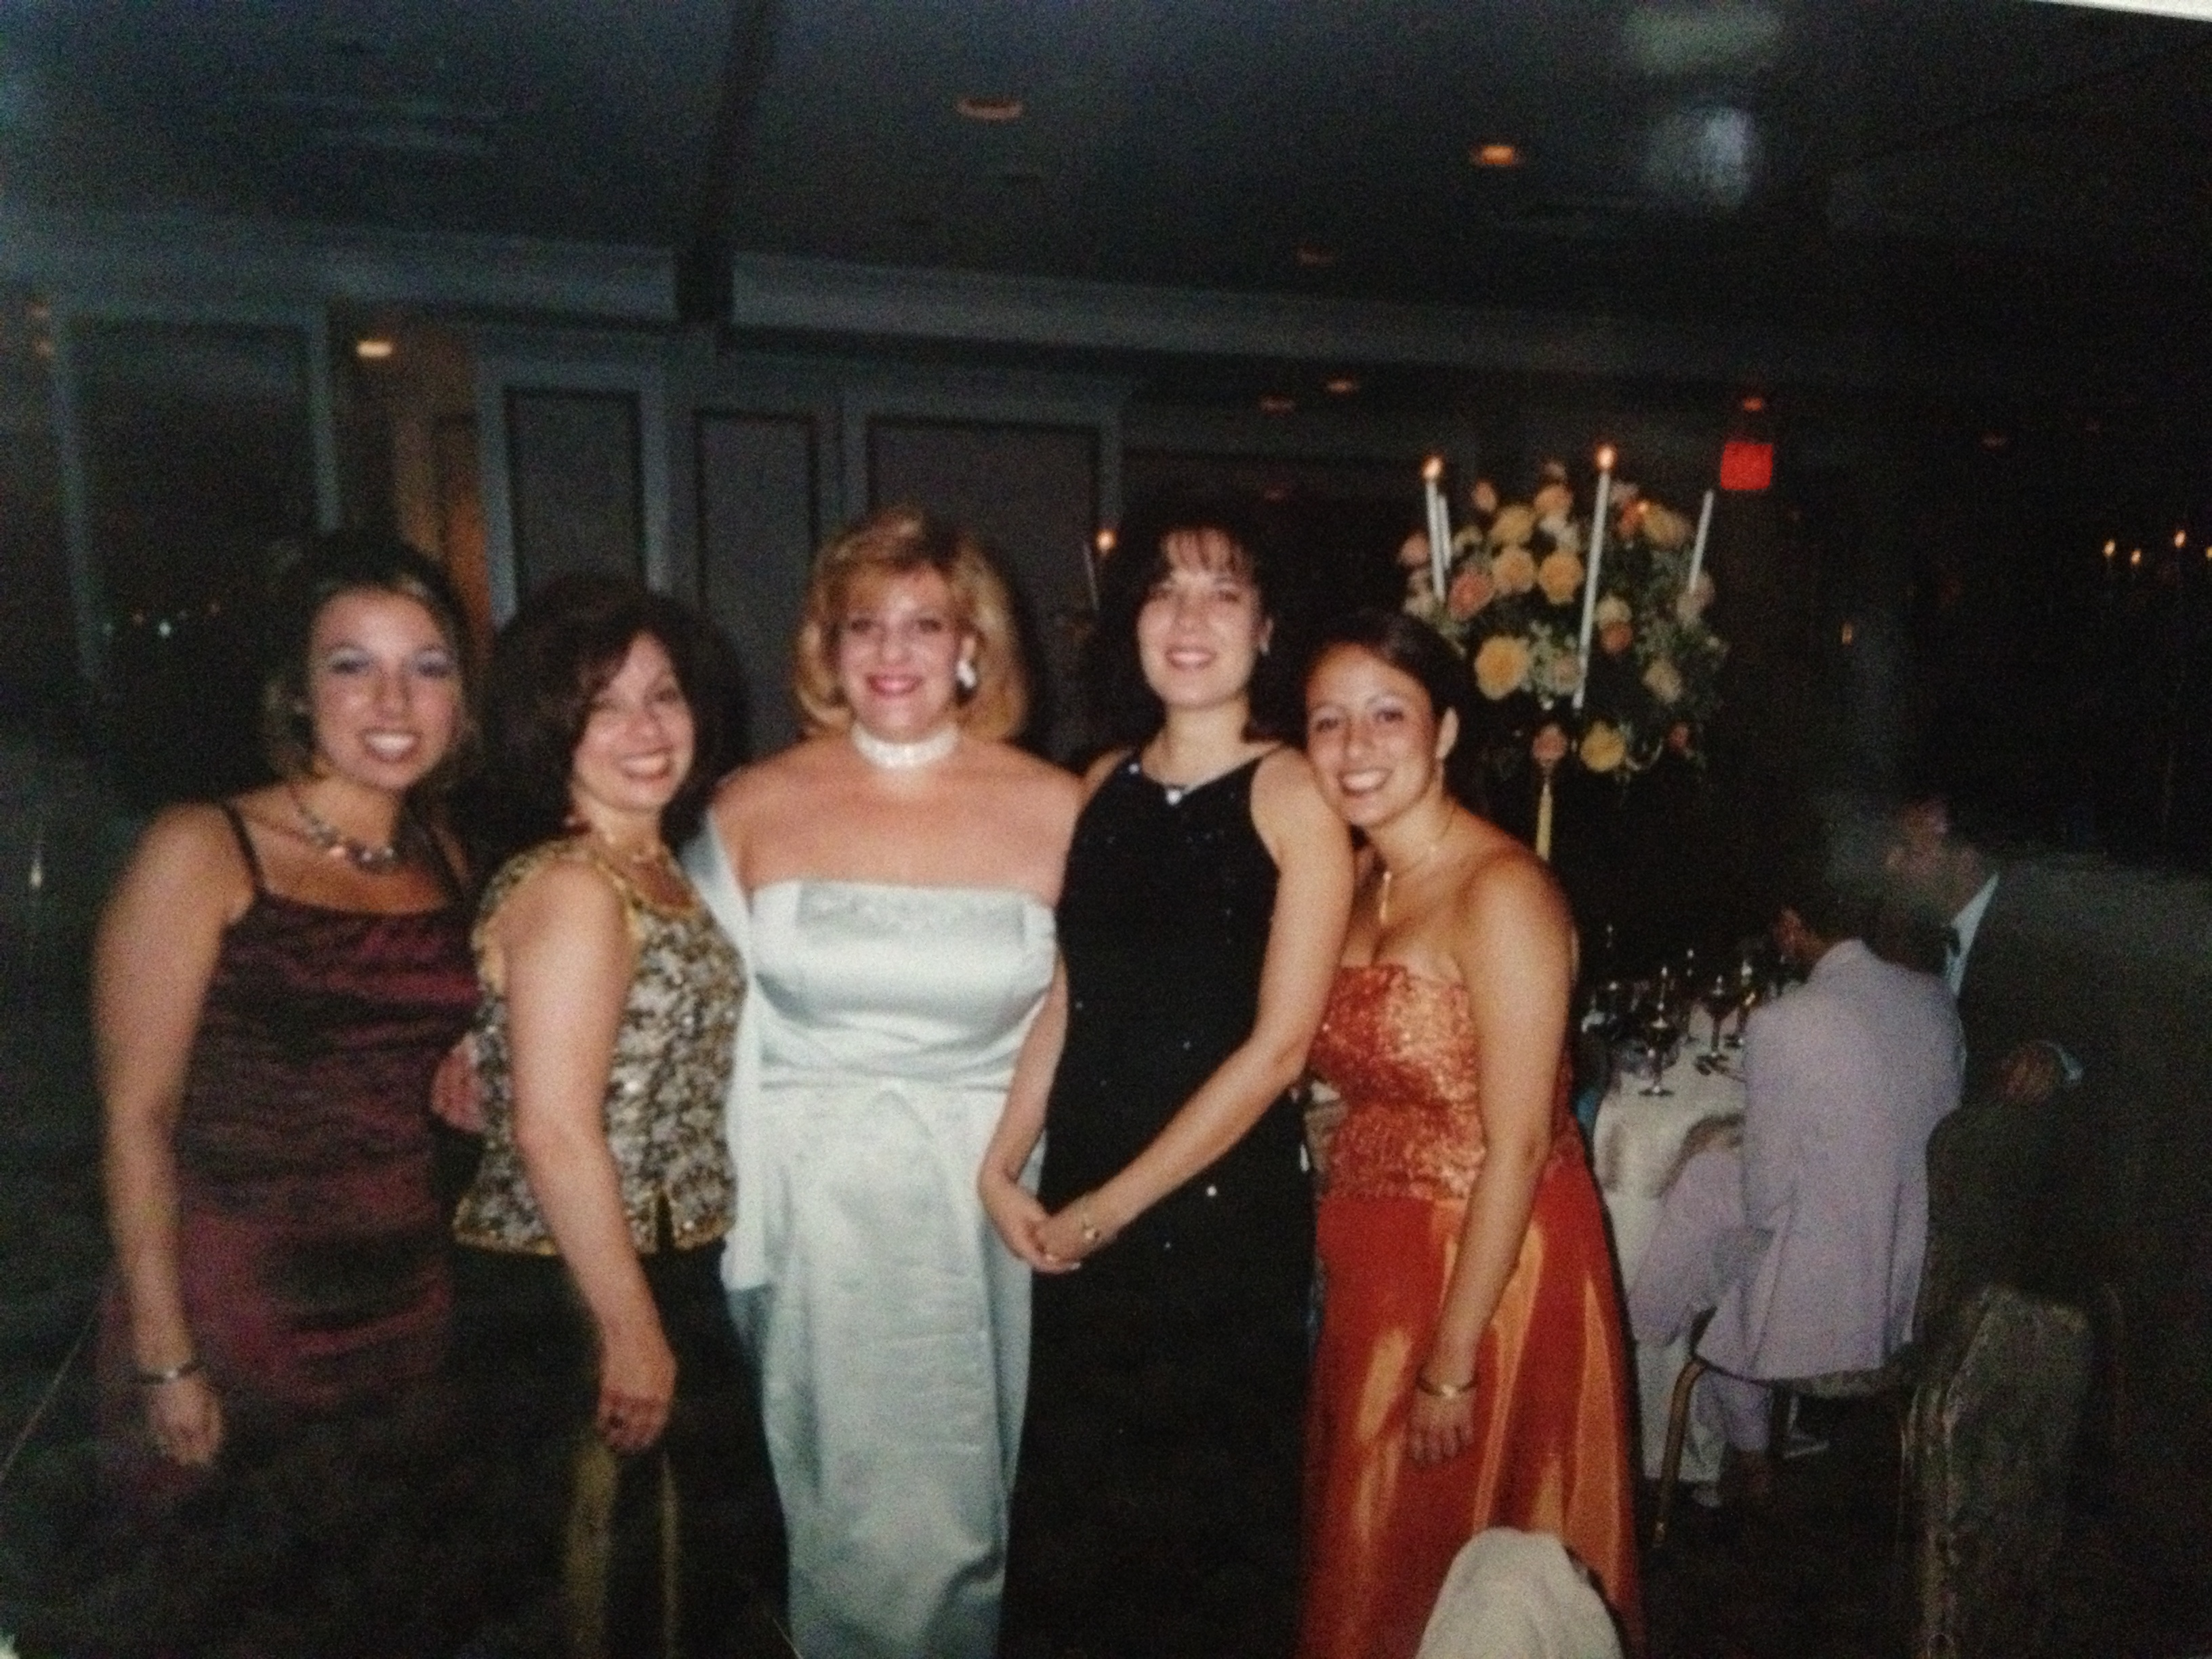 Me (far right) and Marie (center) in 2001